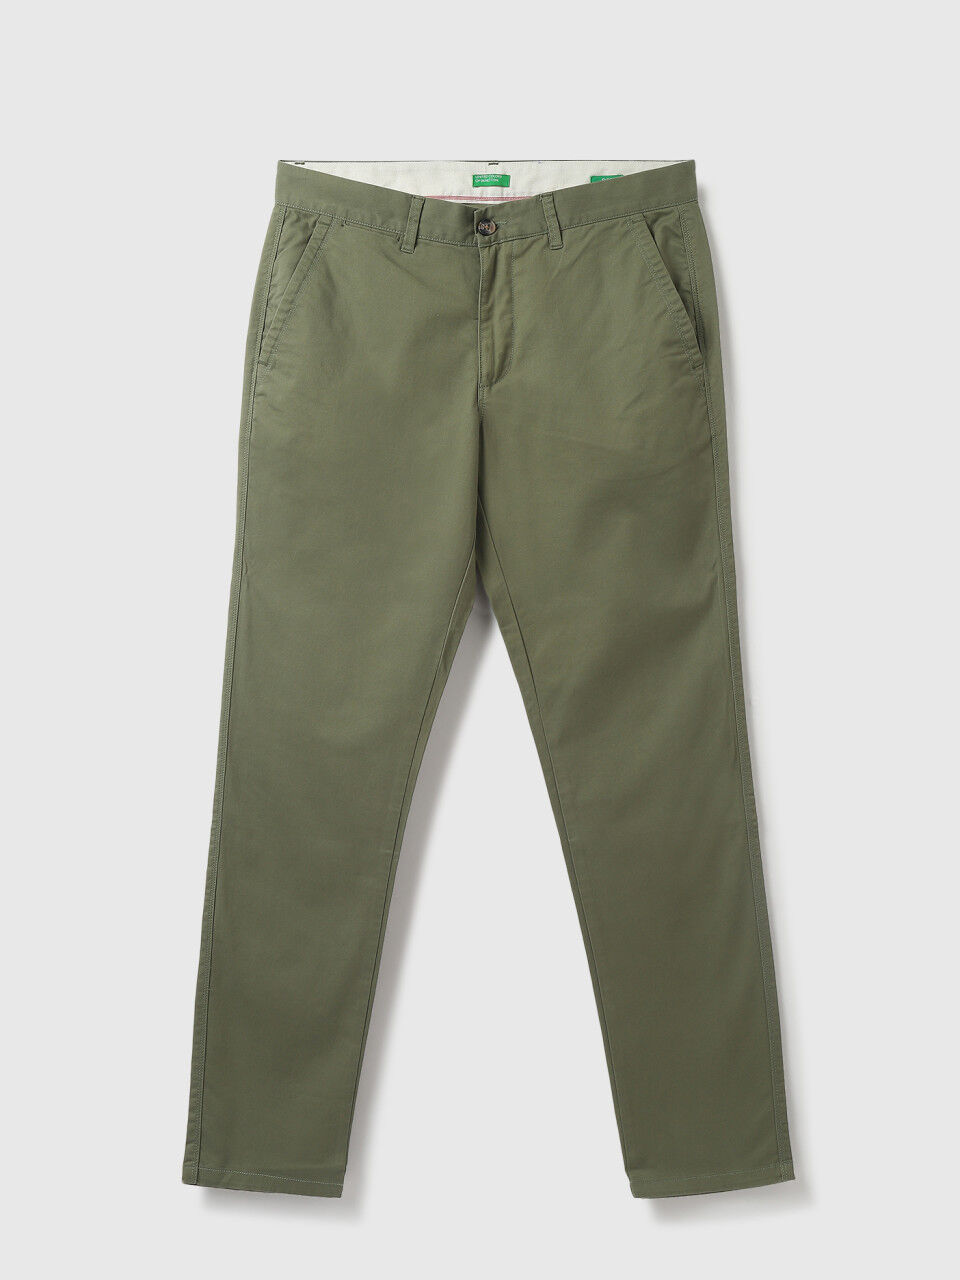 United Colors Of Benetton Casual Trousers  Buy United Colors Of Benetton  Mens Slim Fit Solid Trousers  Beige Online  Nykaa Fashion